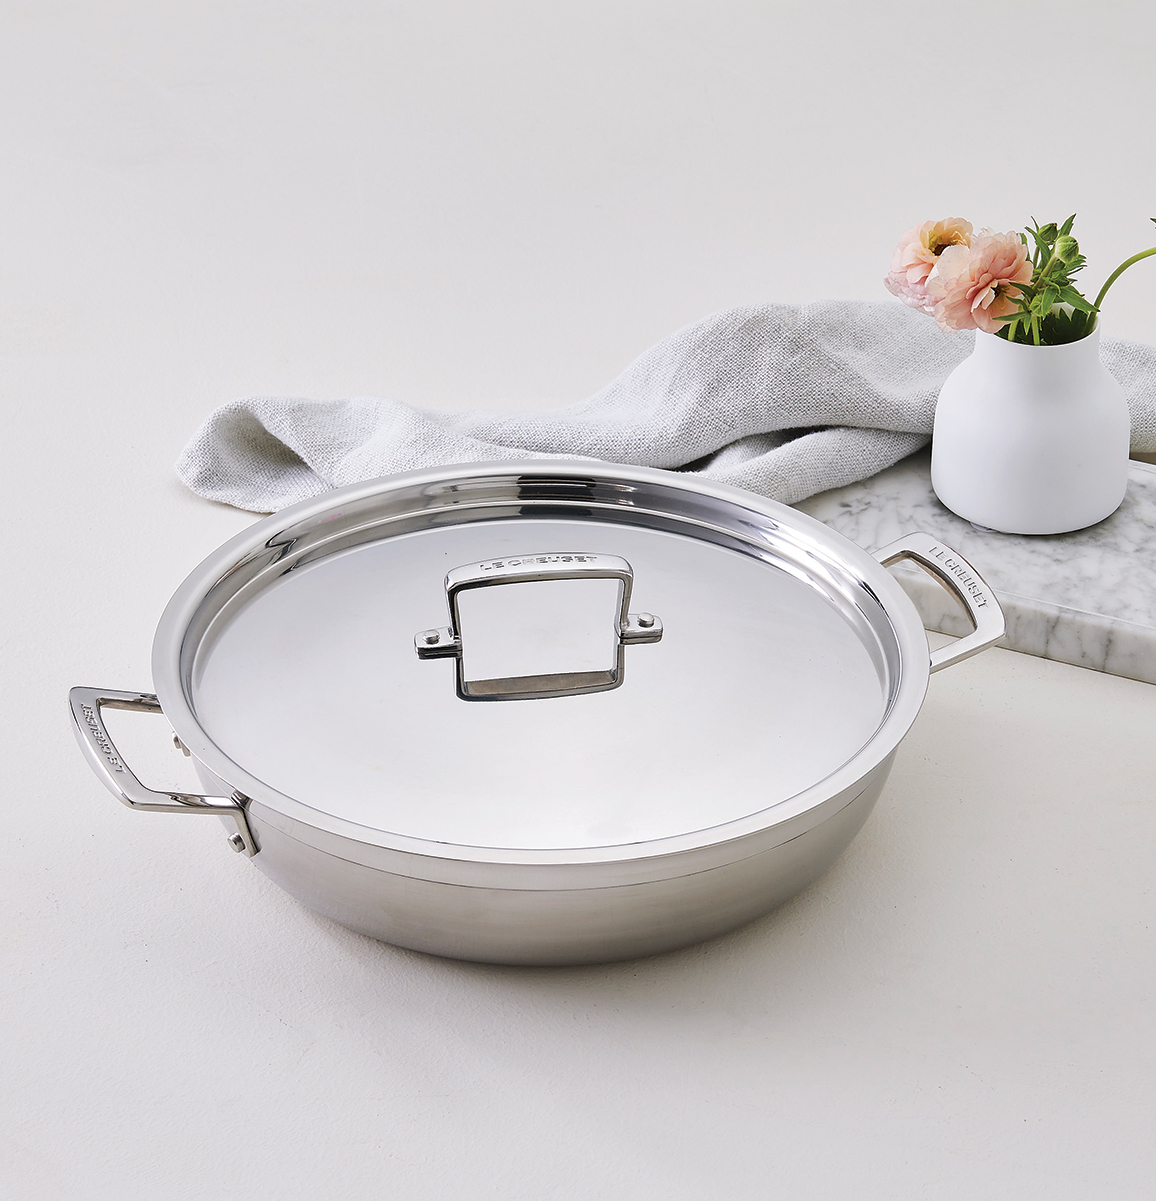 Le Creuset 3-ply Stainless Steel Shallow Casserole 24cm Product Image 0